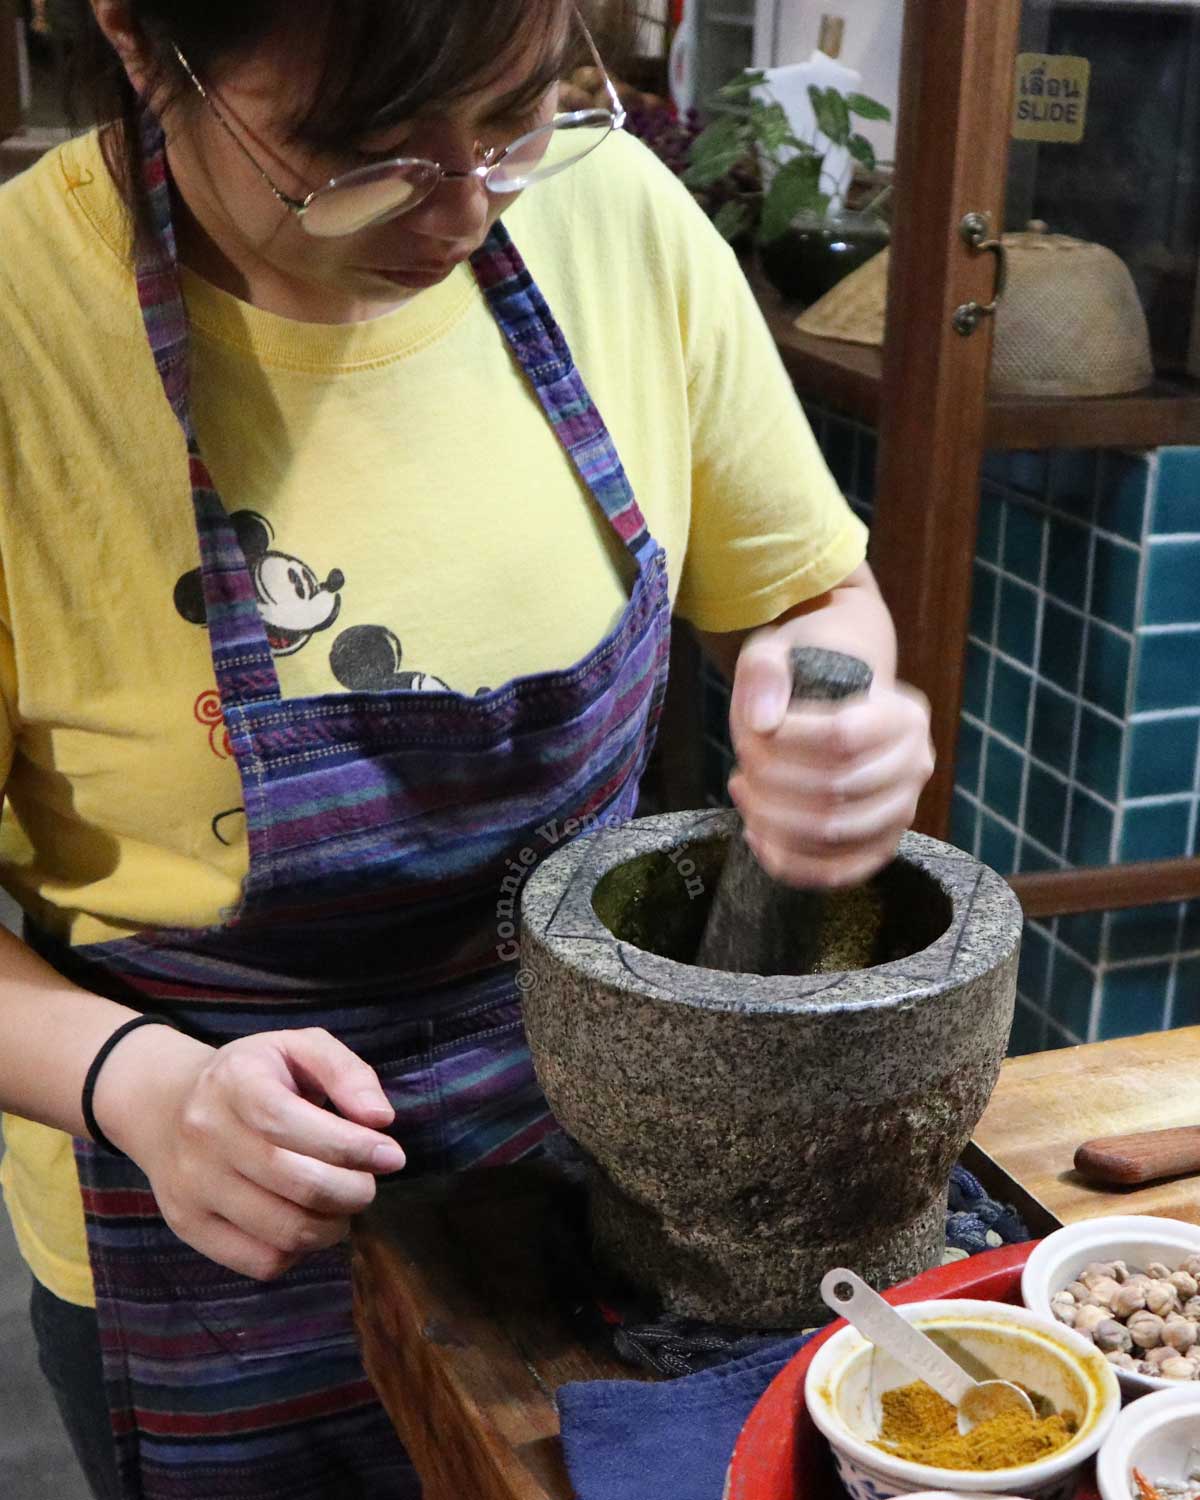 Grinding spices and herbs with an mortar and pestle made of unpolished granite. Chiang Mai, Thailand, 2020